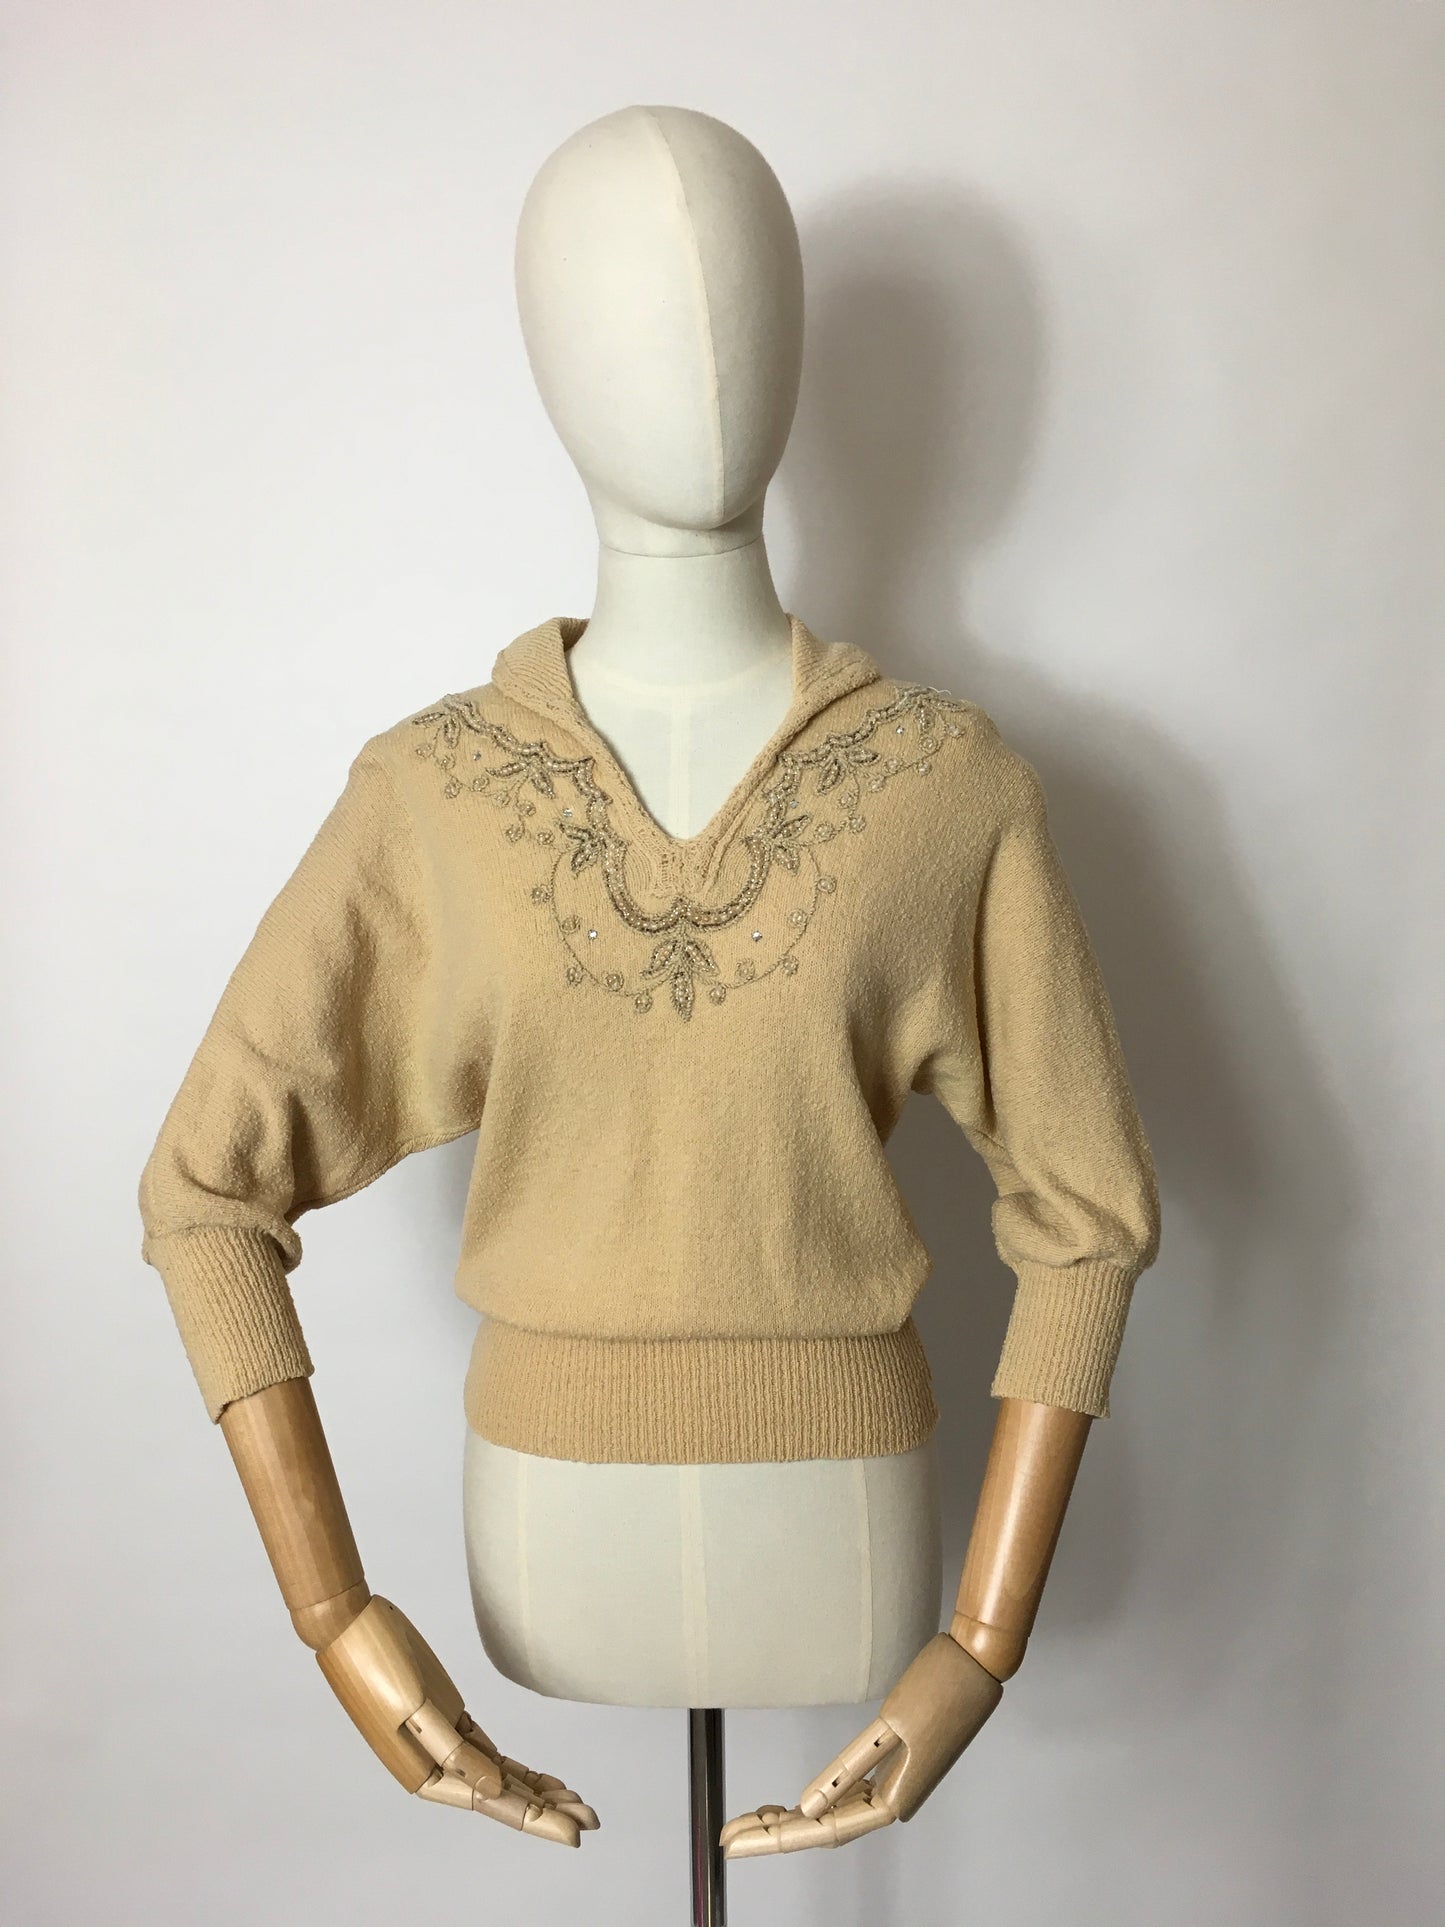 Original 1940’s Knitted Jumper - Adorned with Beautiful Beadwork & Has Dolman Sleeves